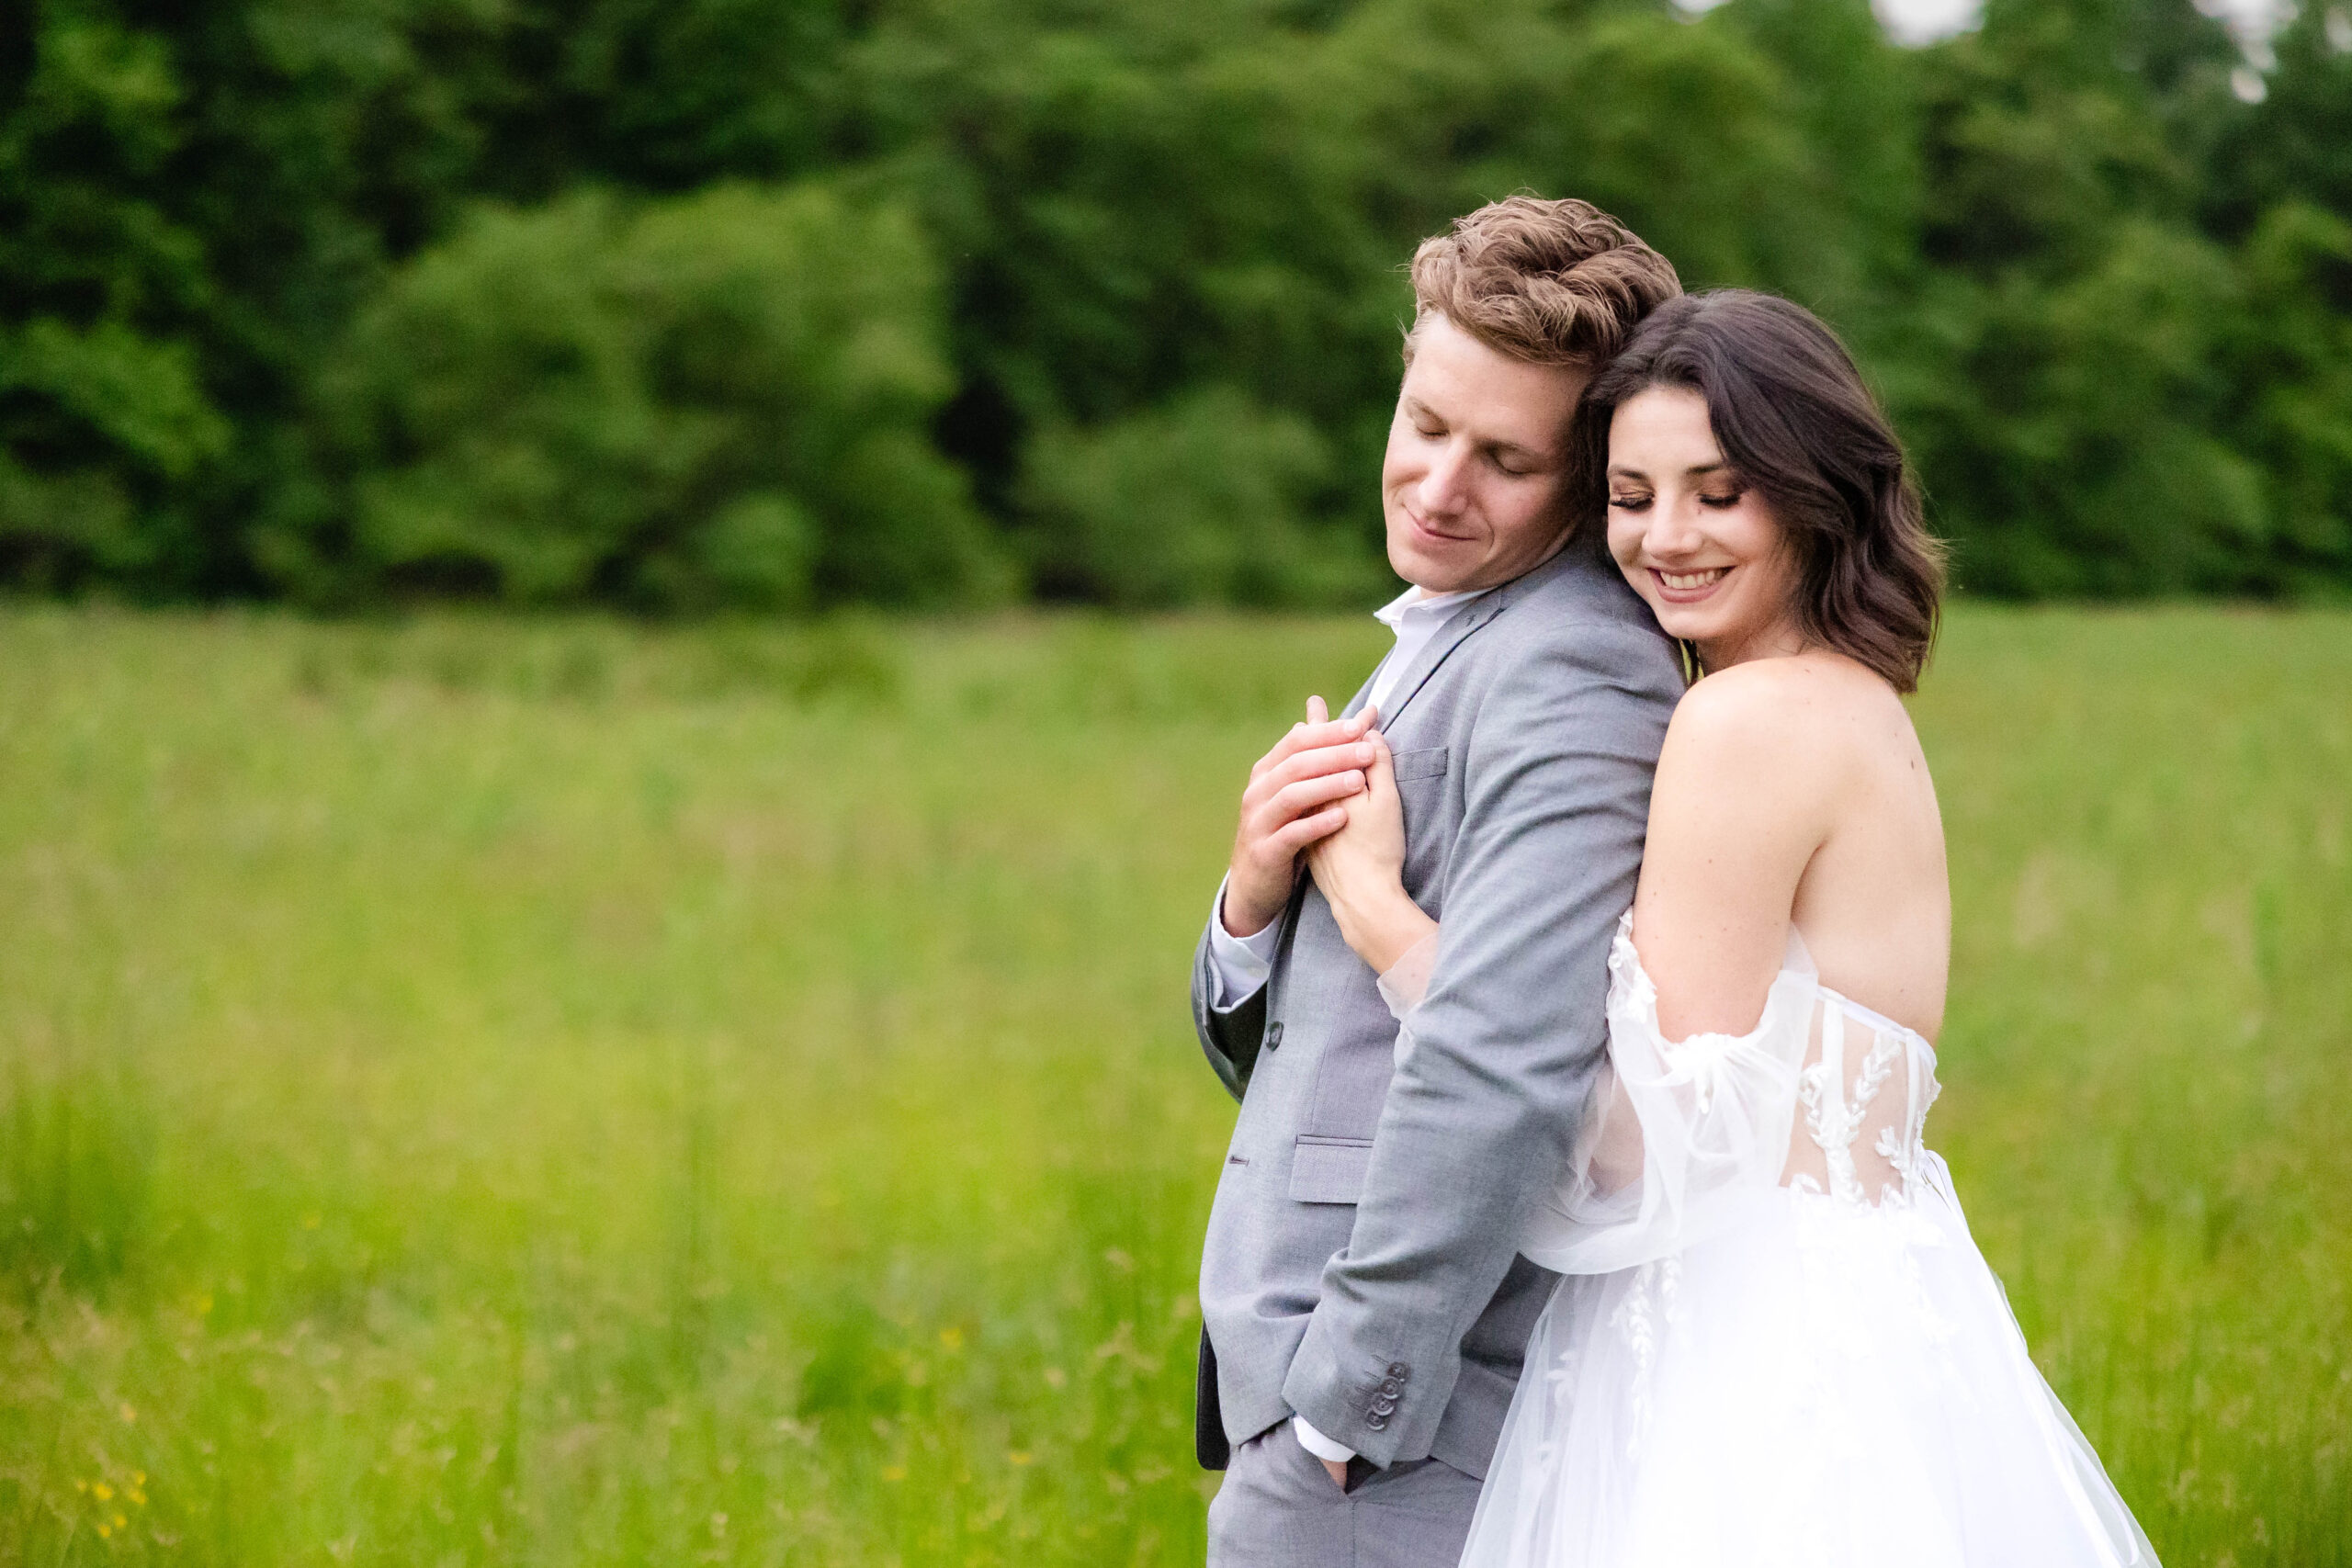 Bride and Groom in a field of spring grass. Bride is hugging her groom from behind as he turns and leans in to her. Bride in a custom strapless gown and groom in a light gray tuxedo. Photographed by Virginia Beach Wedding Photographer, Angela Foushee Photography